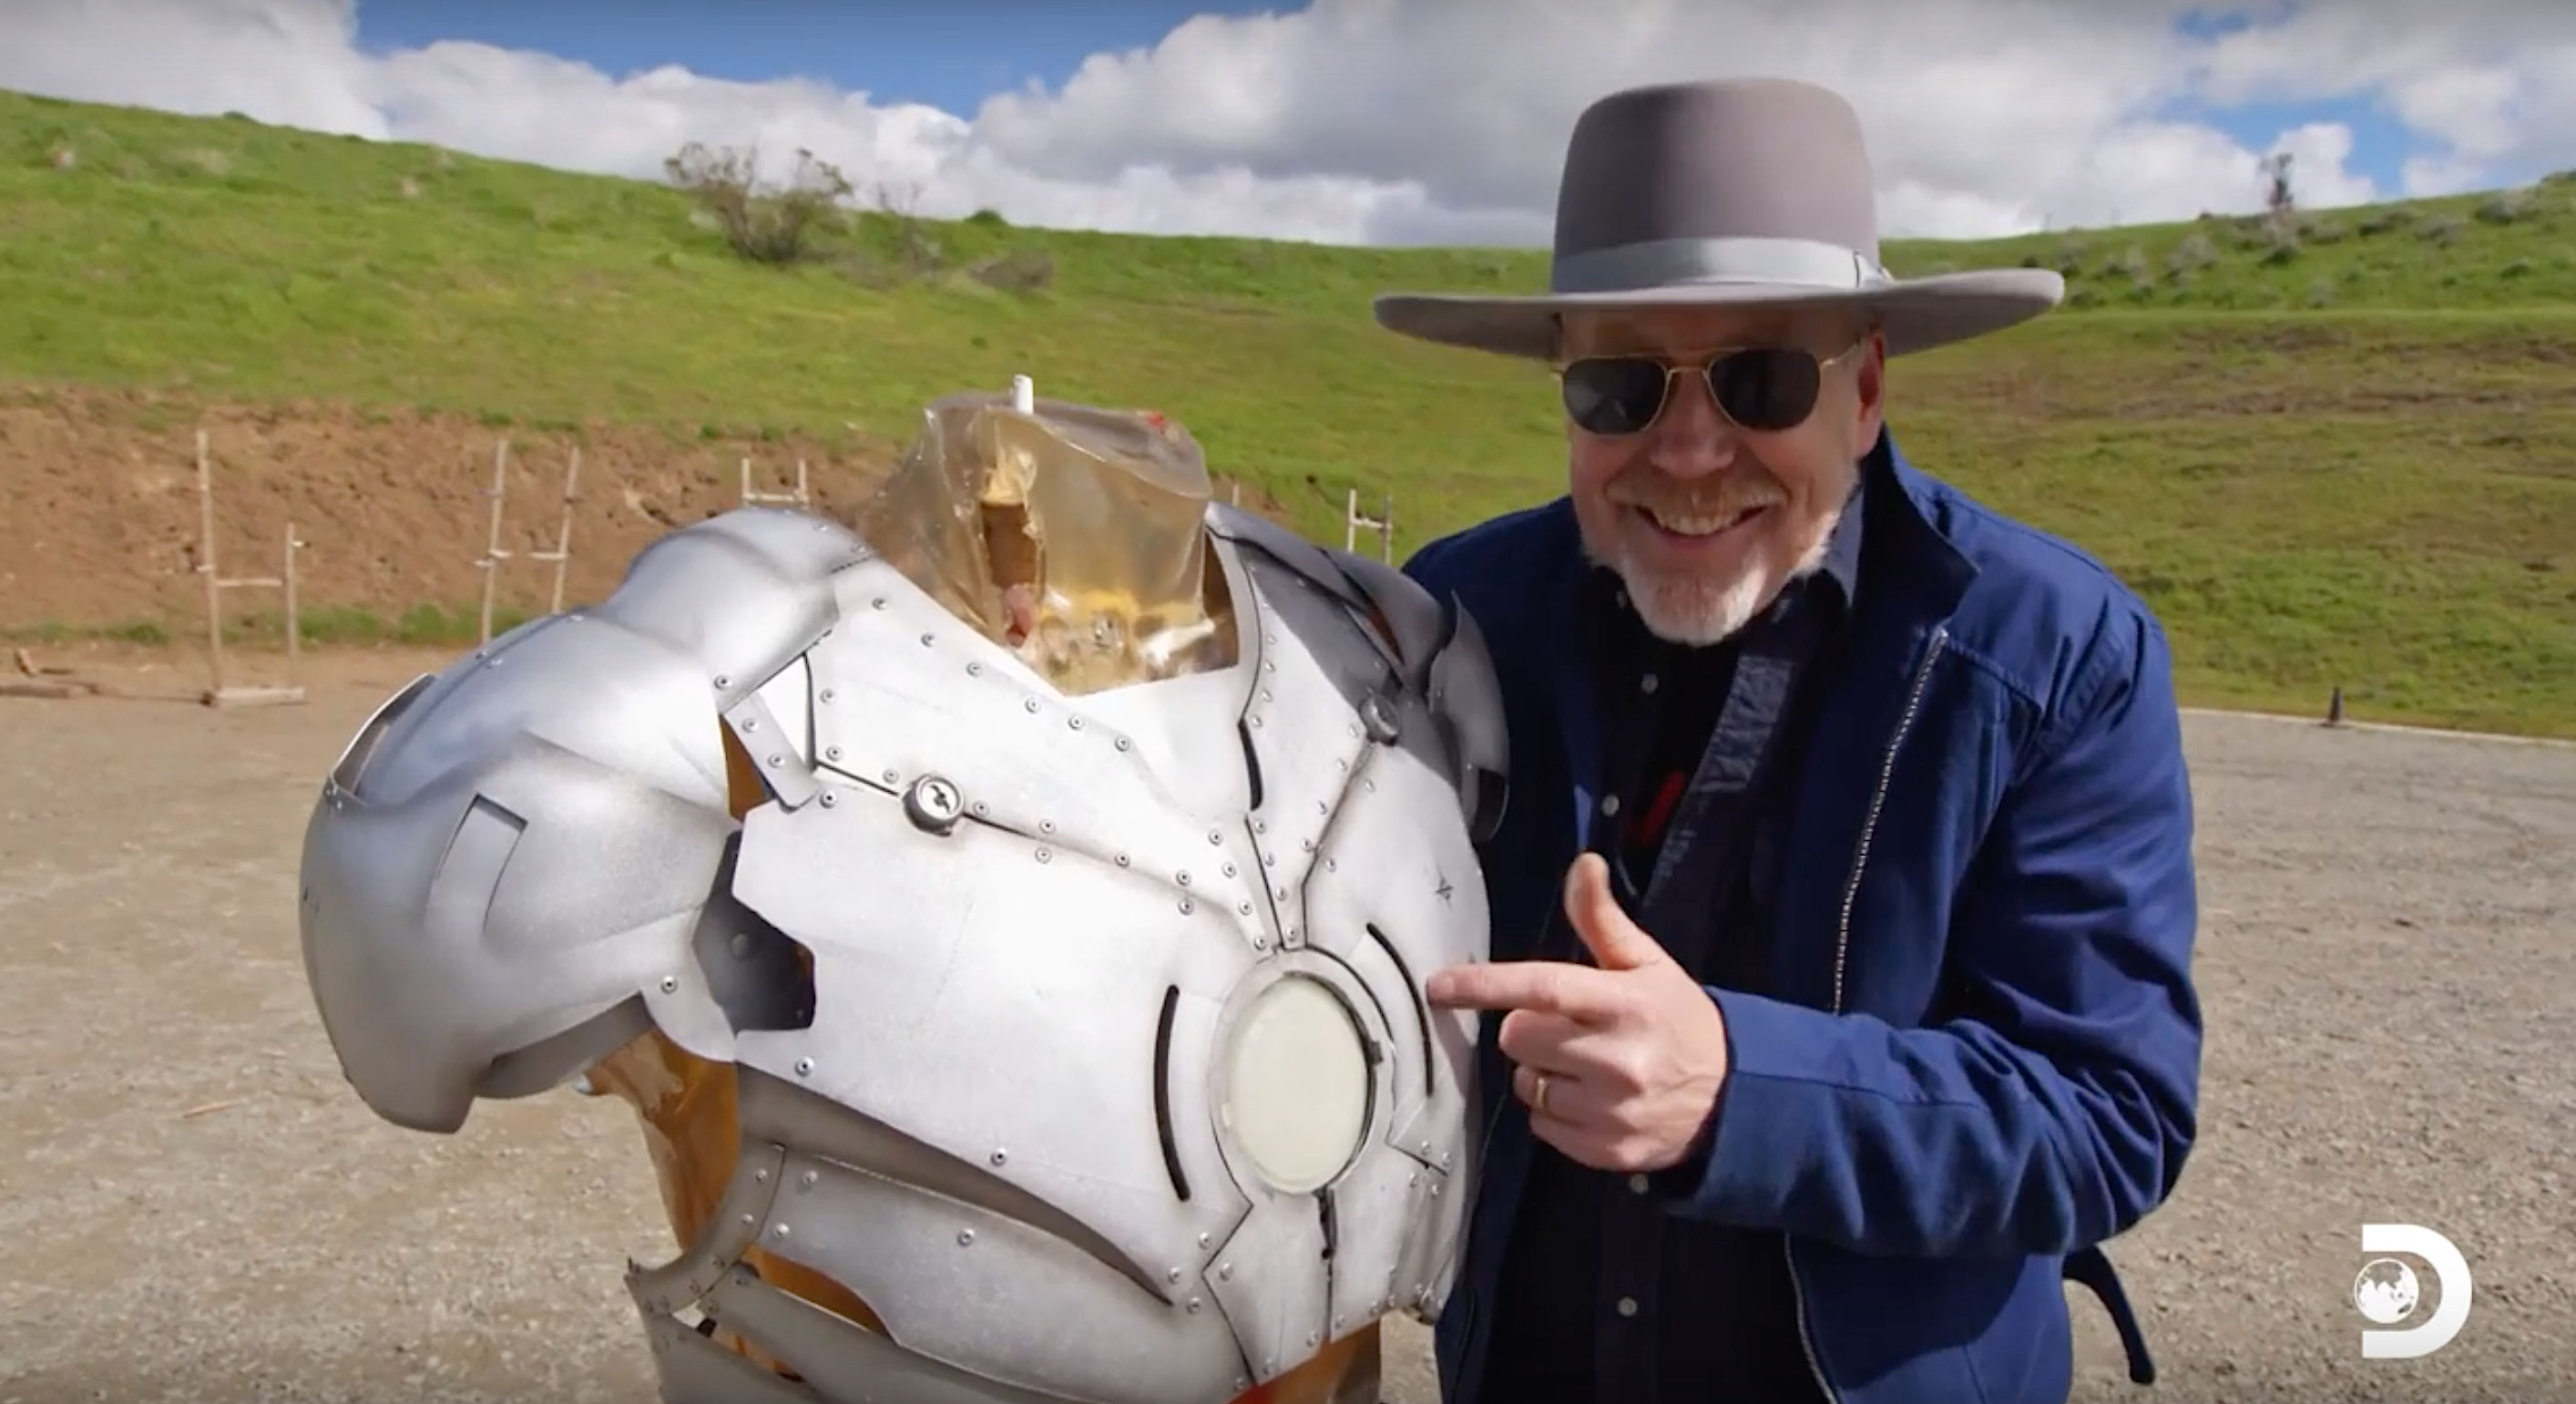 Adam Savage demonstrates Iron Man suit for Savage Builds on Discovery